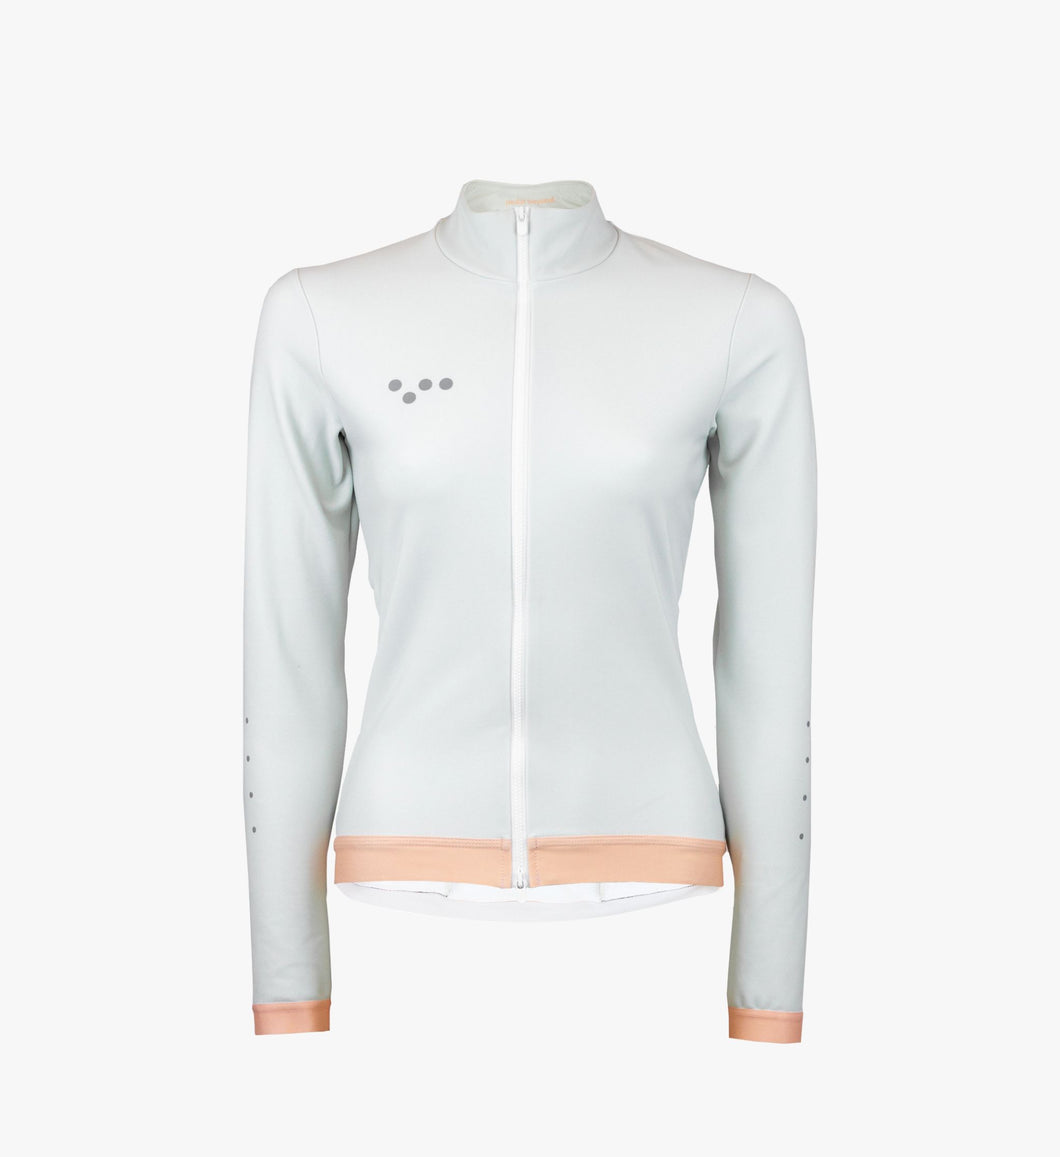 Elevate / Women's Elements Thermal LS Jersey - Off White